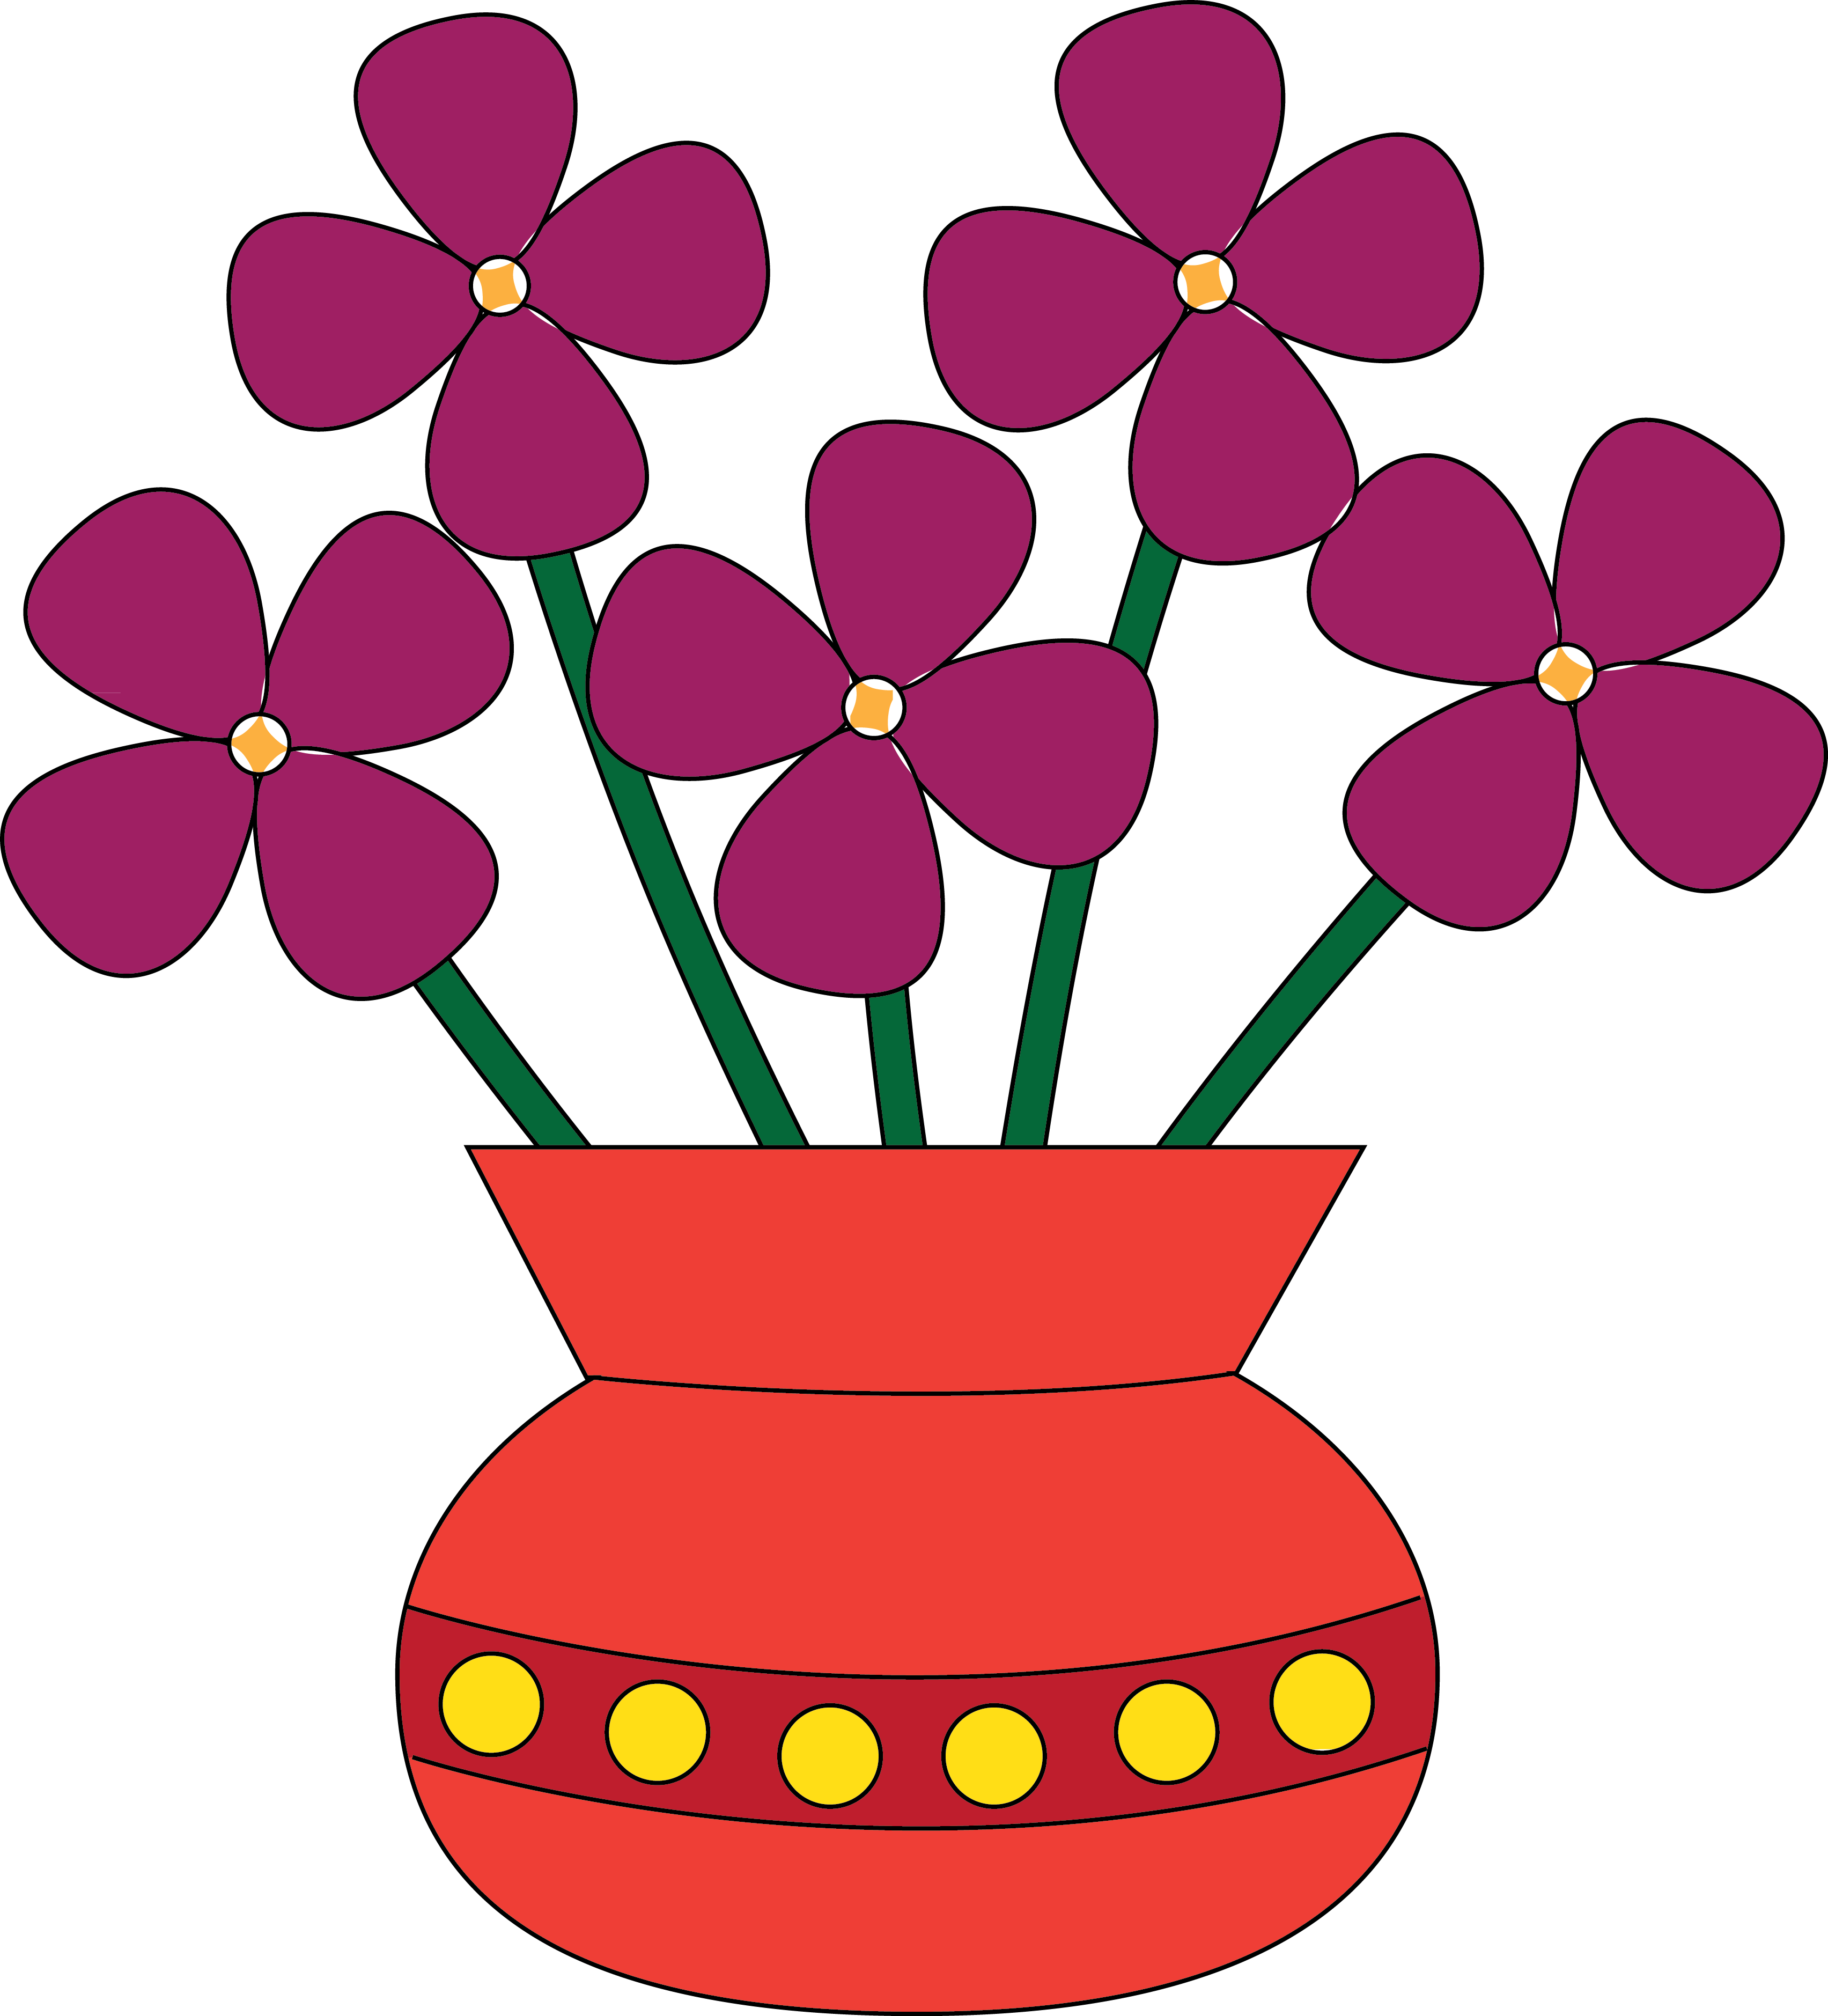 Flower Clip Art Free Download | Clipart Panda - Free Clipart Images